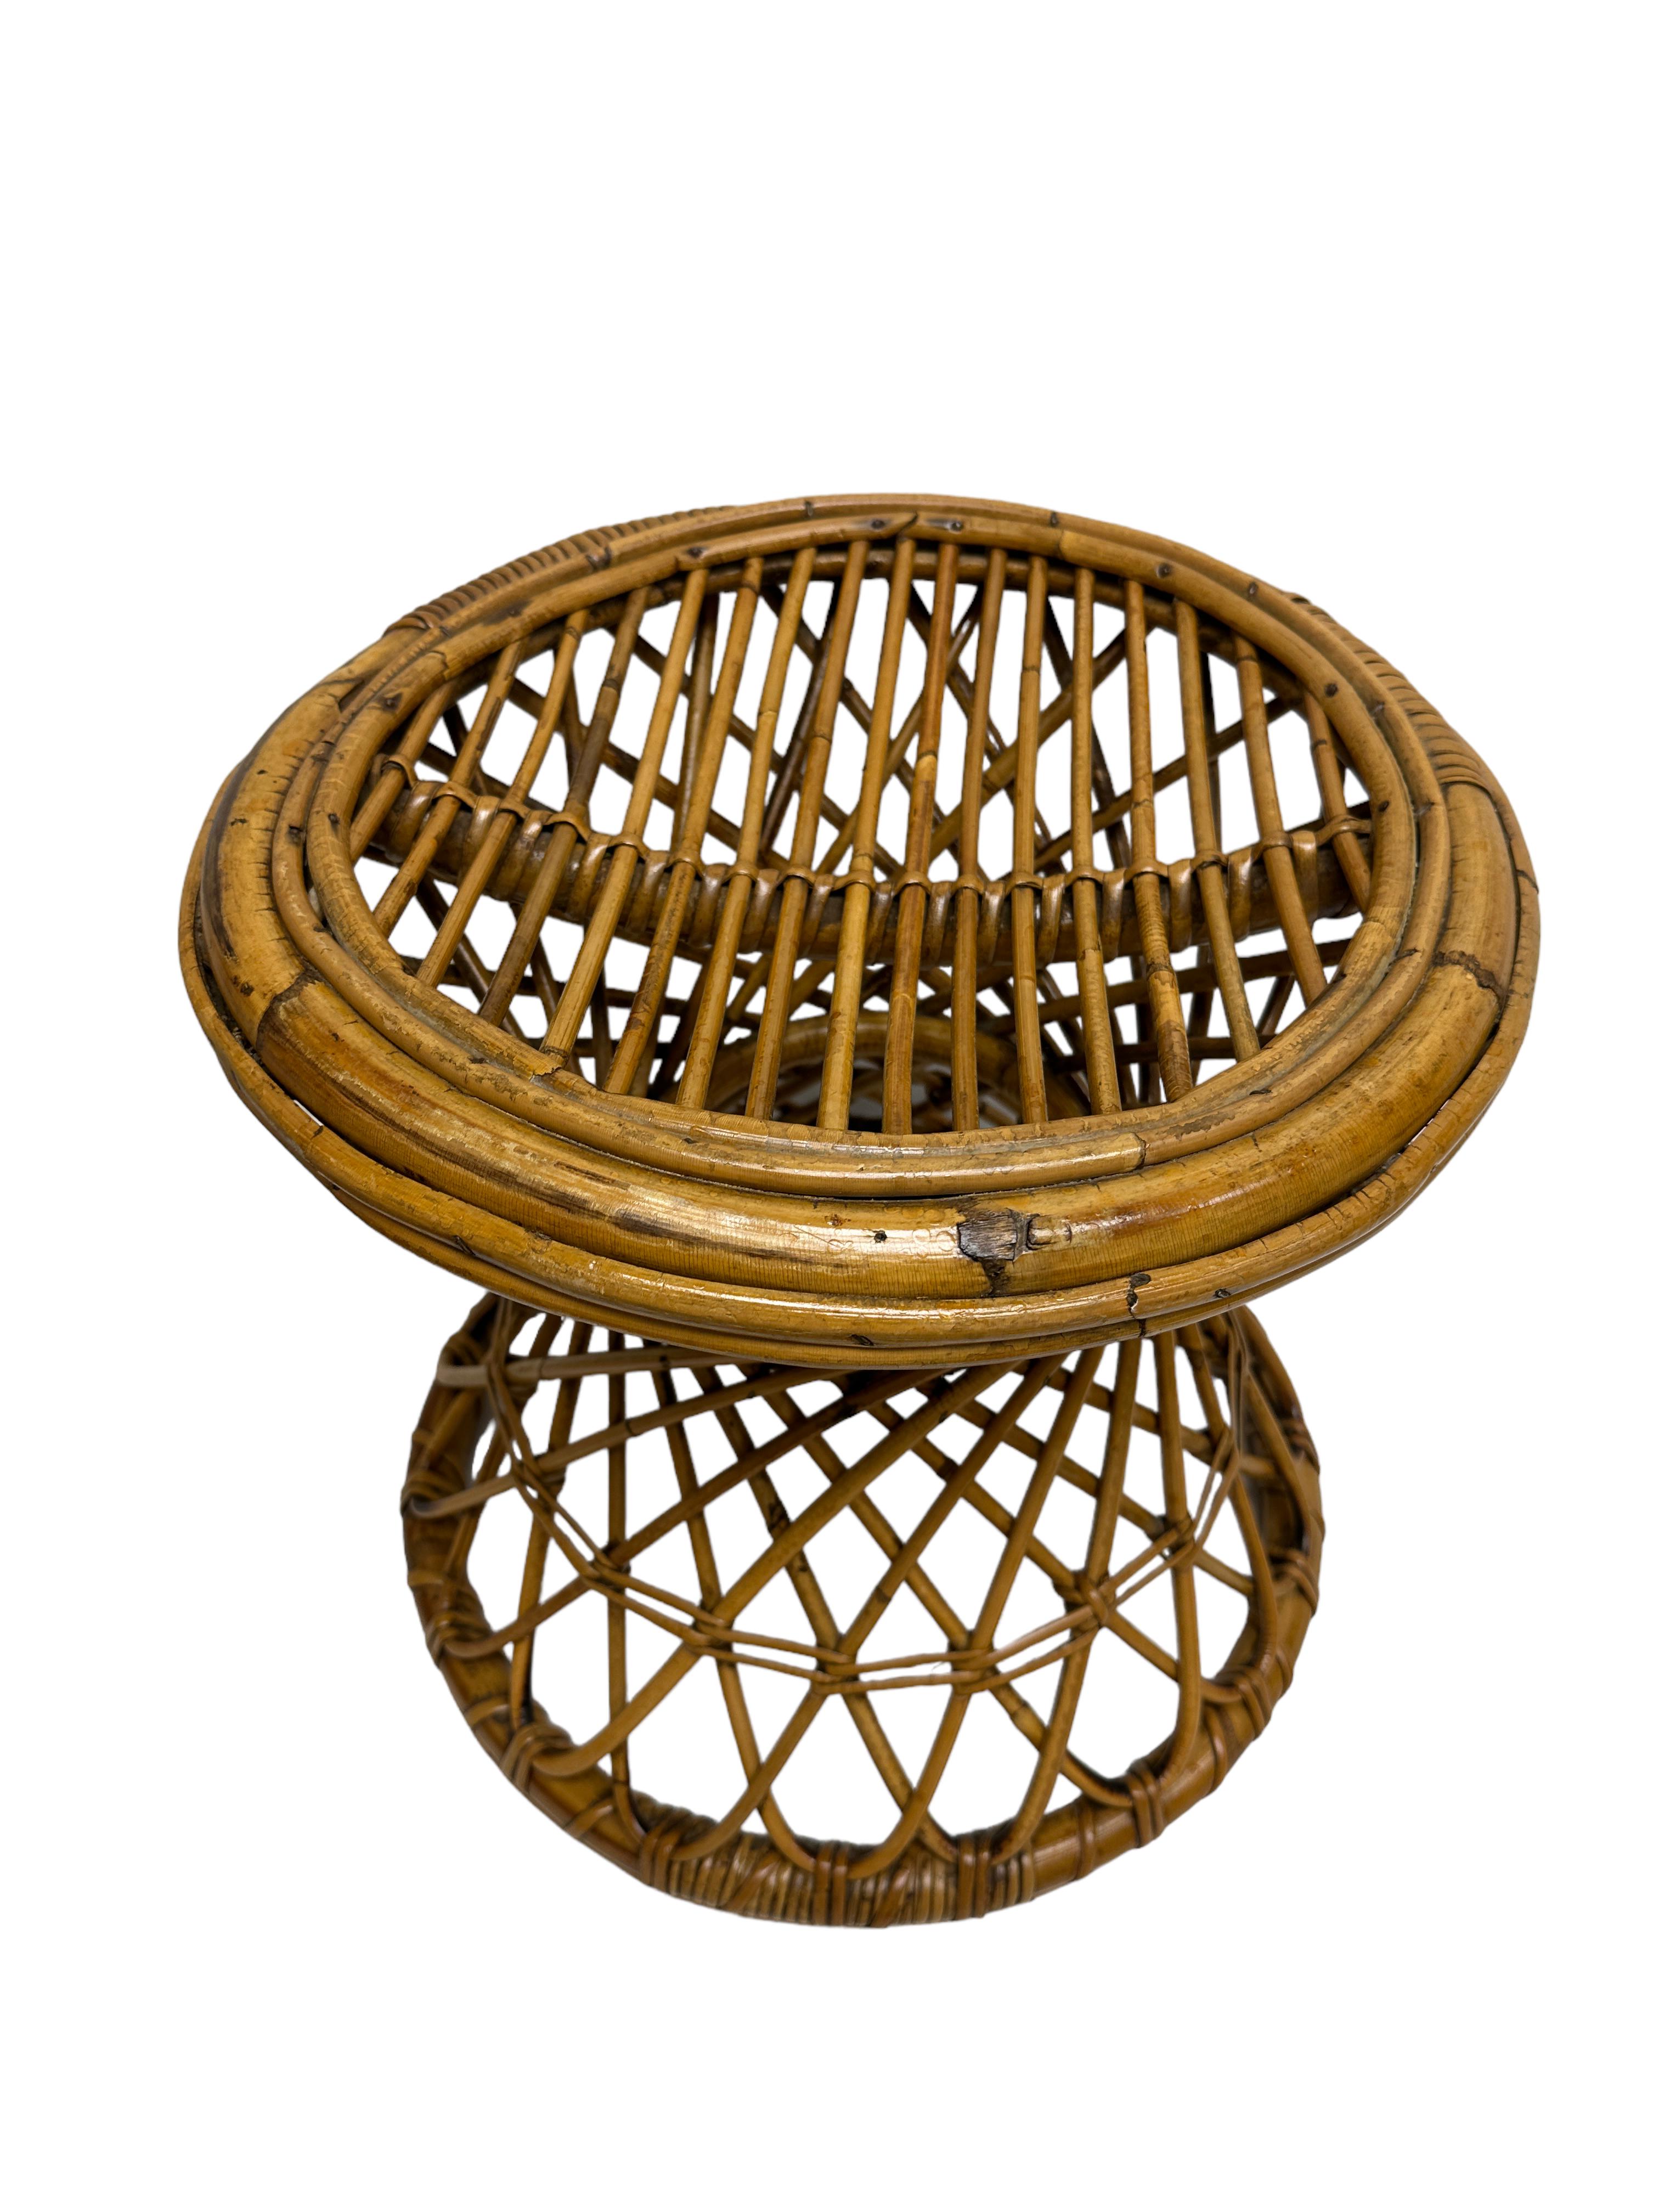 Italian Vivai del Sud Bamboo Rattan Decorative Side table Flower Pot Stand or Seat For Sale